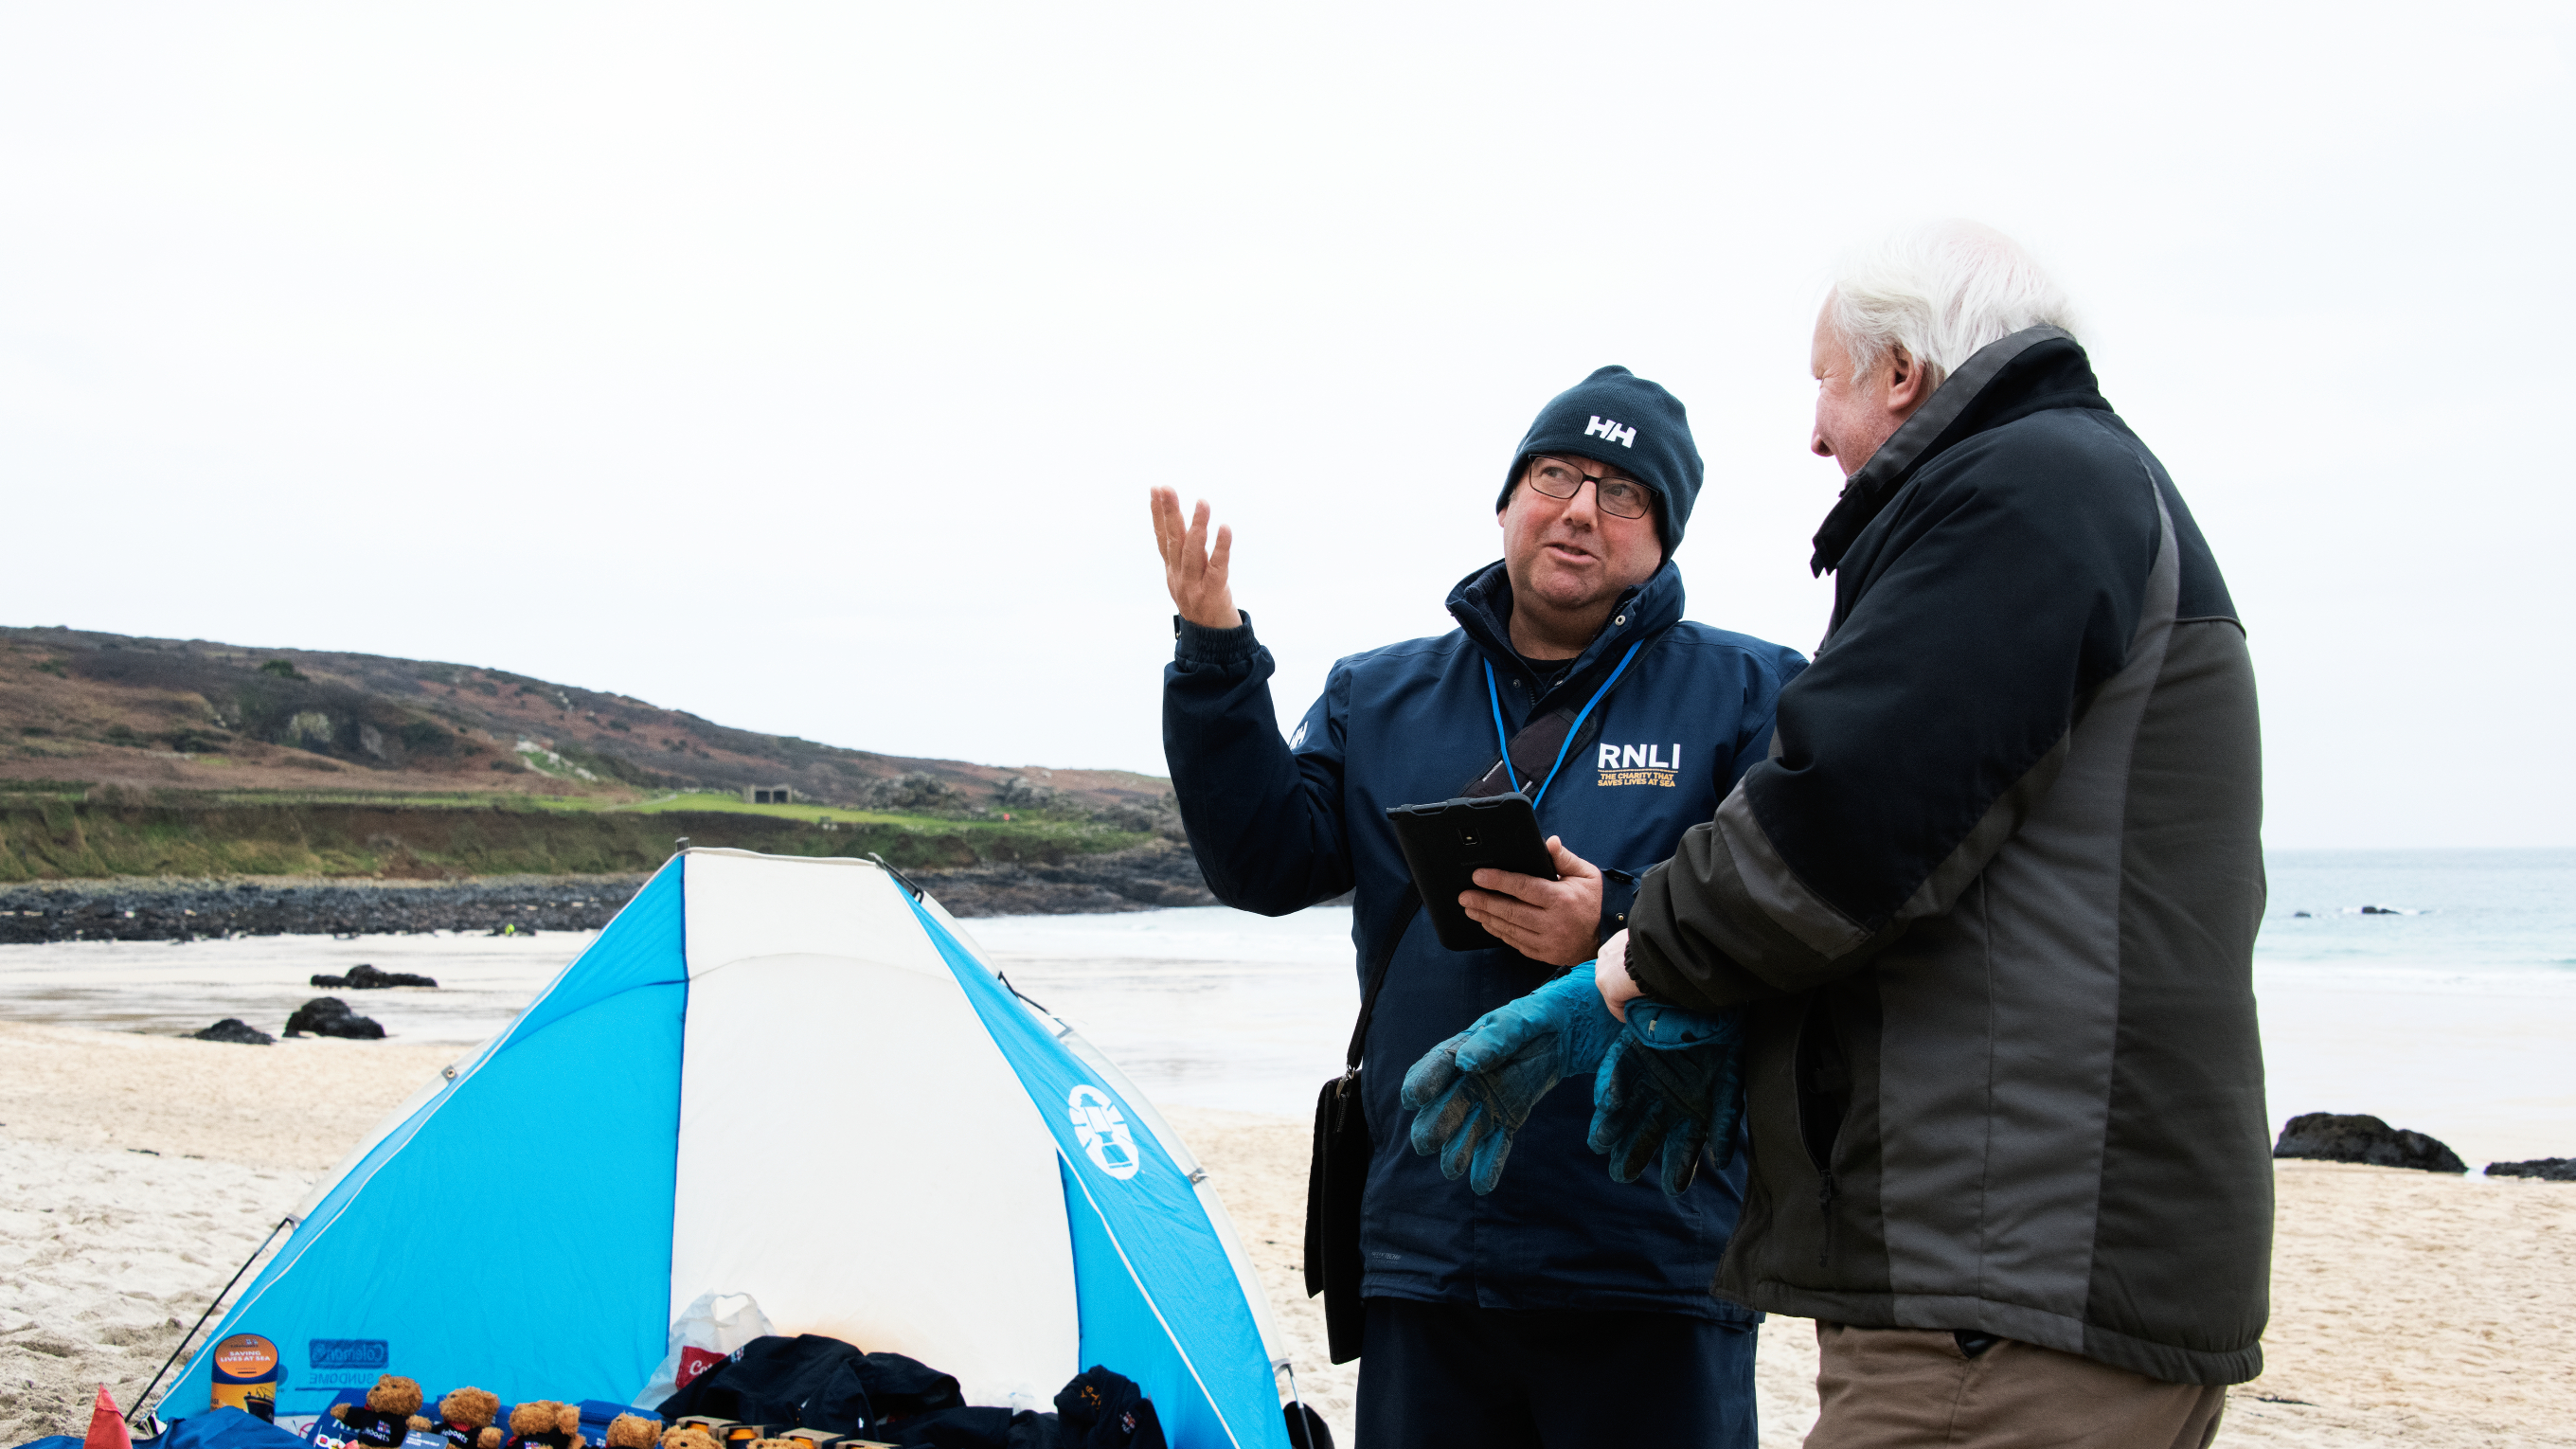 F2F fundraiser David Lilley talking to members of the public on Porthmeor beach, St Ives